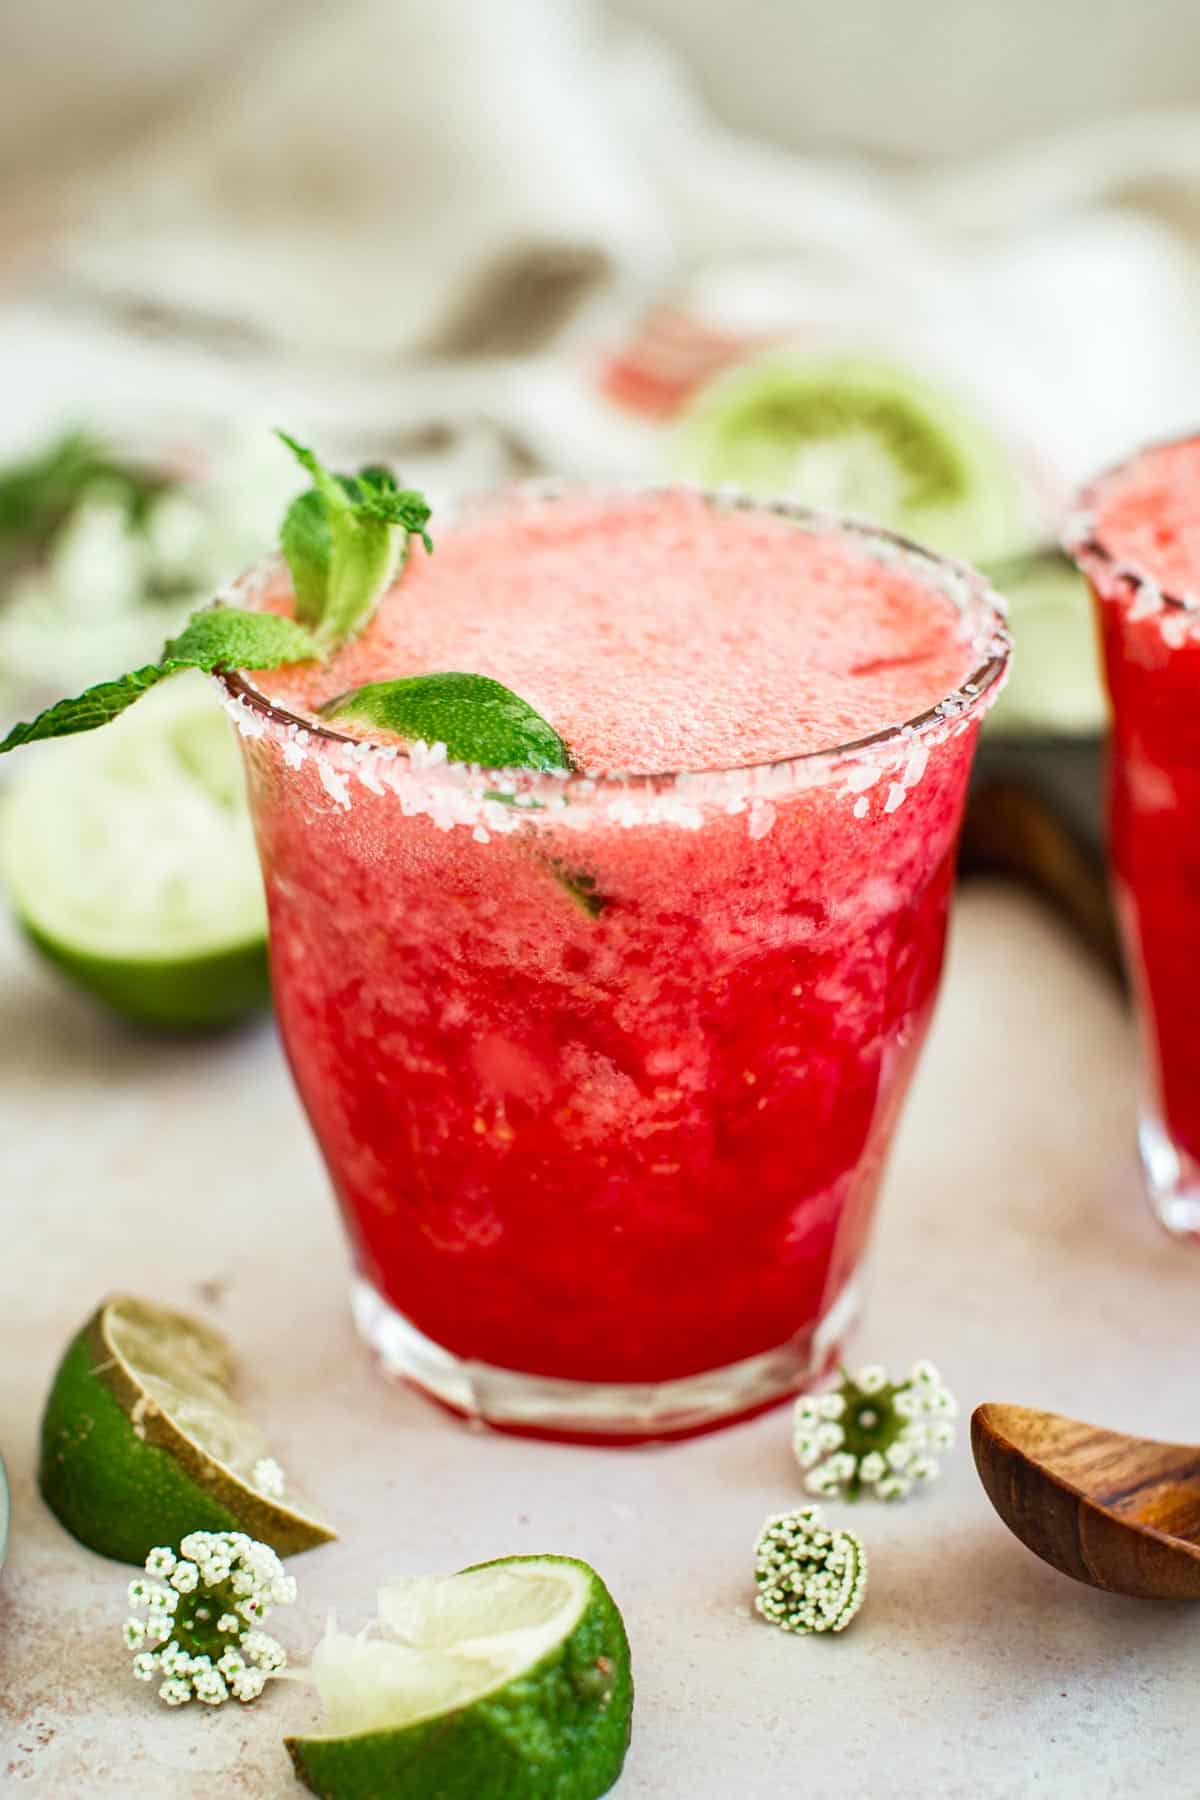 Raspberry margarita with a salted rim and mint leaves.